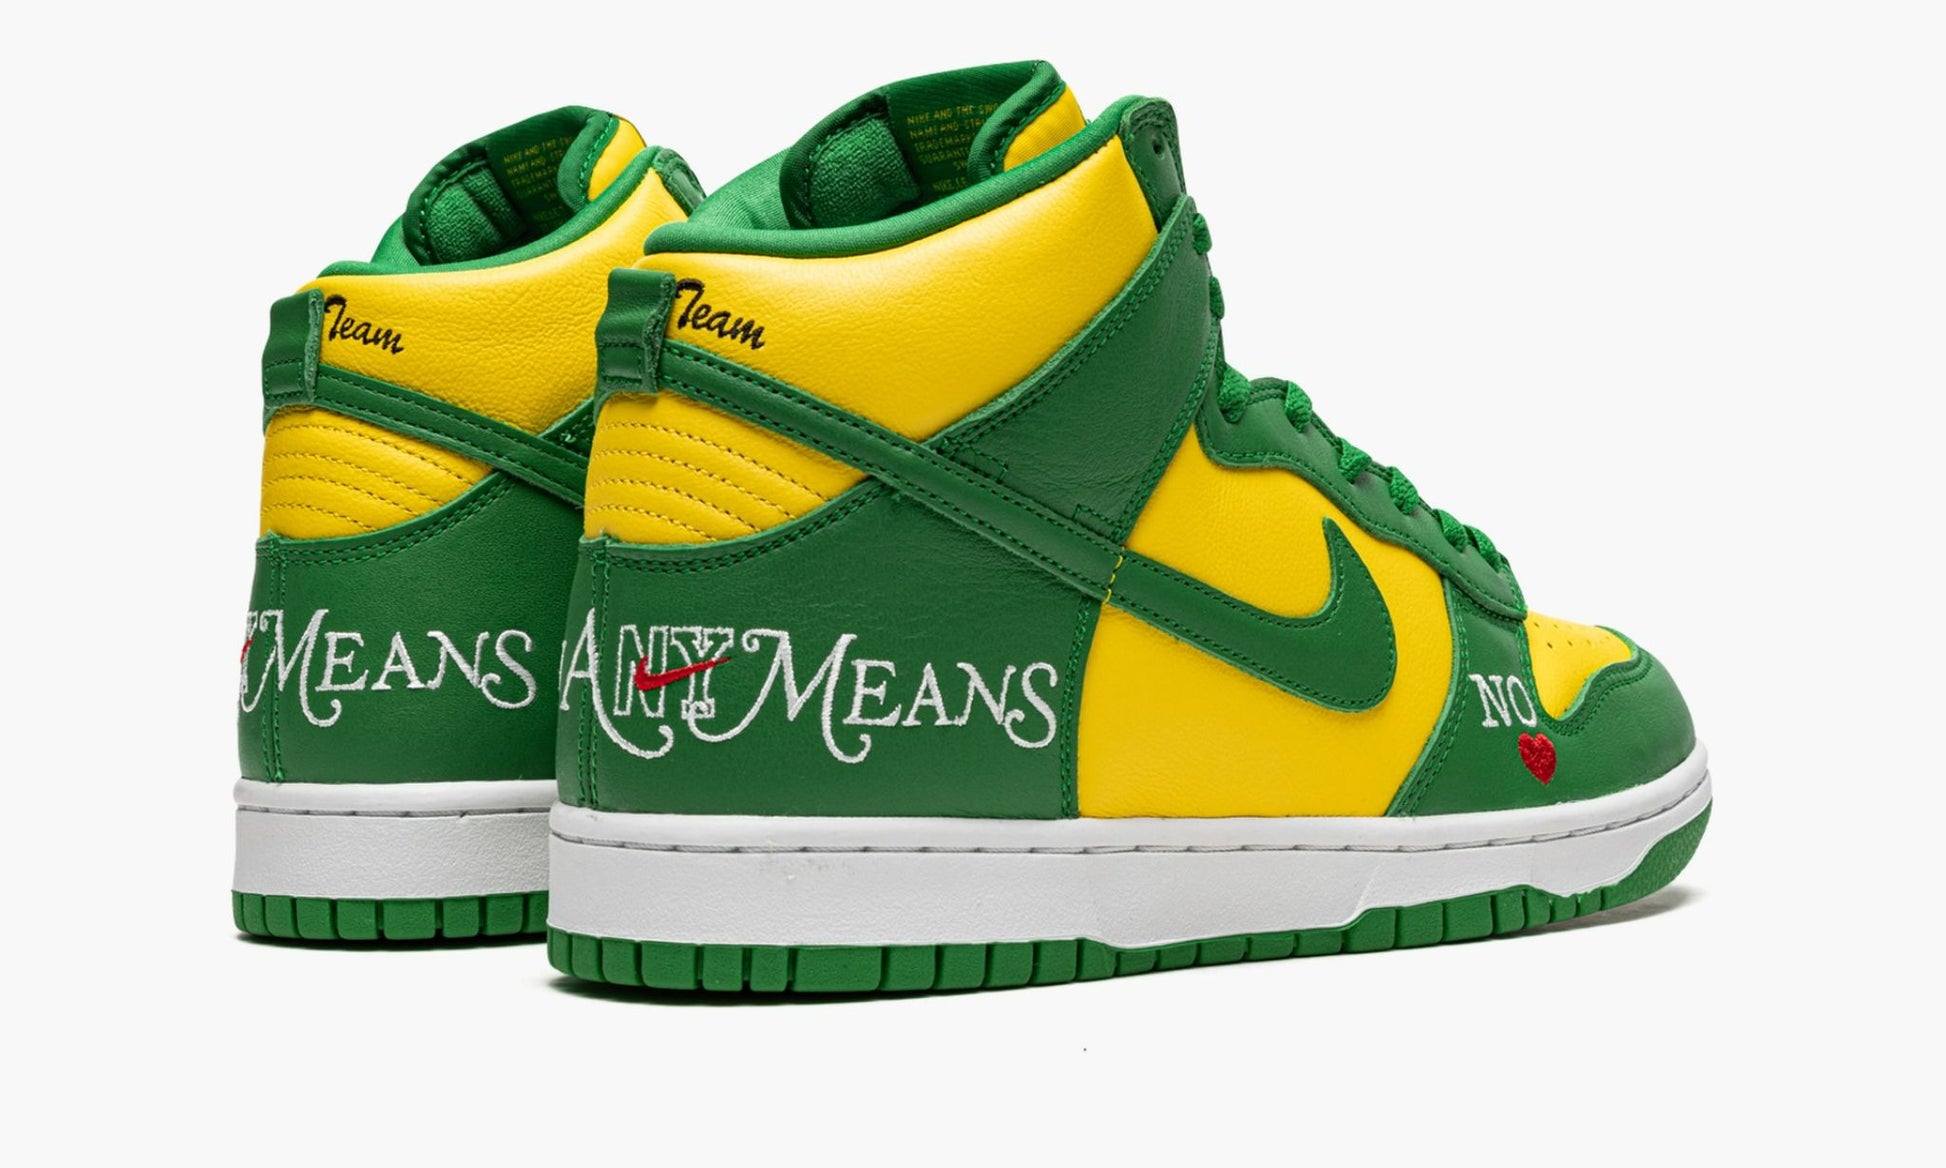 SB Dunk High Supreme By Any Means Brazil - DN3741 700